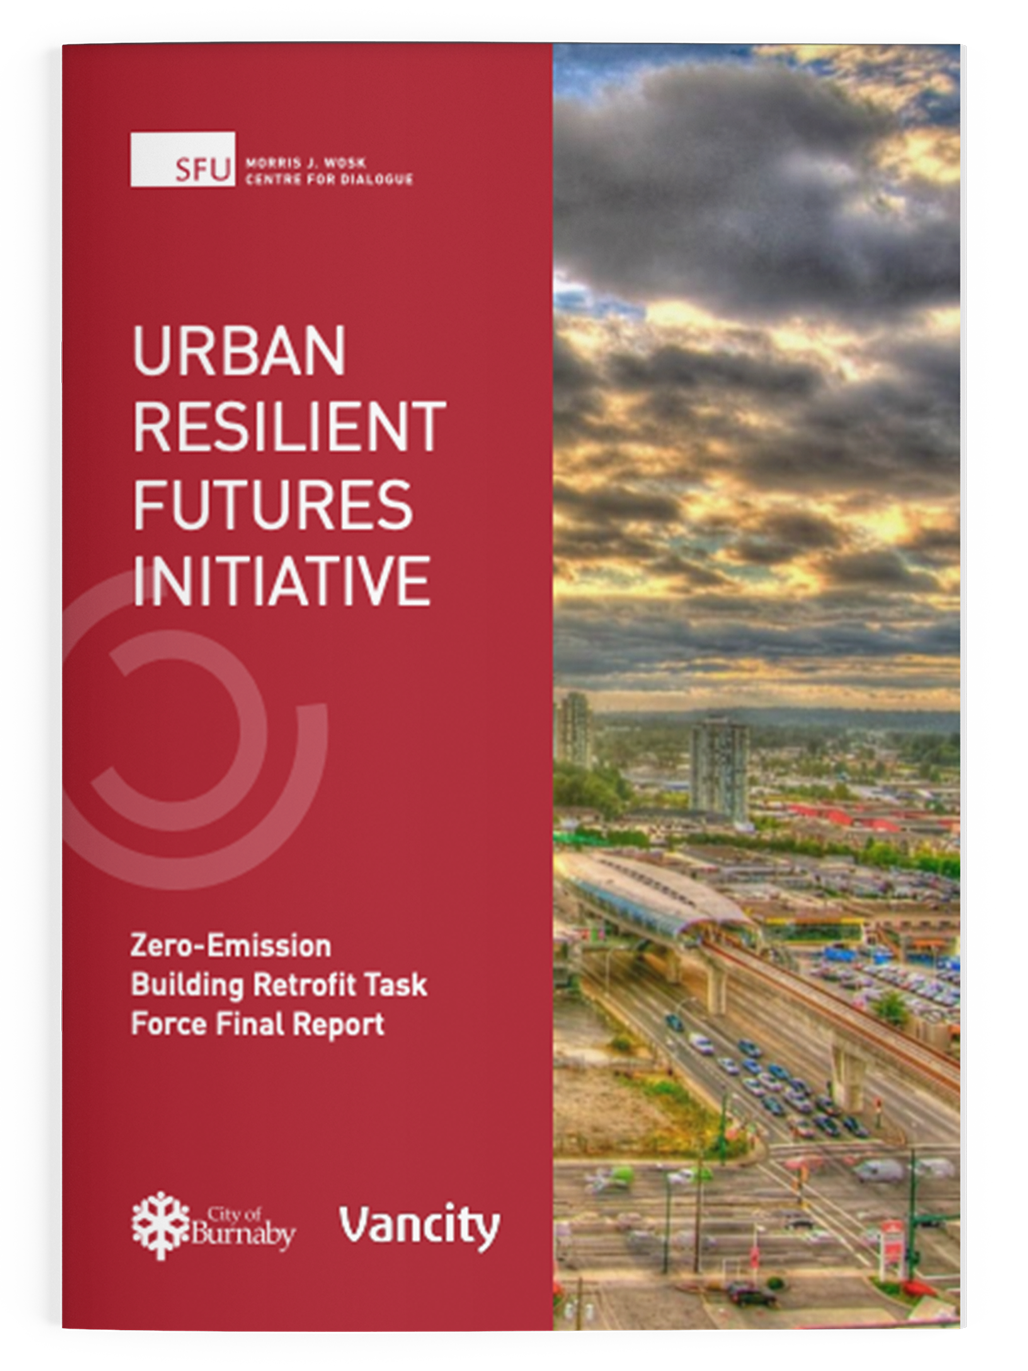 Mockup of the cover of the Zero-Emission Building Retrofit Task Force final report